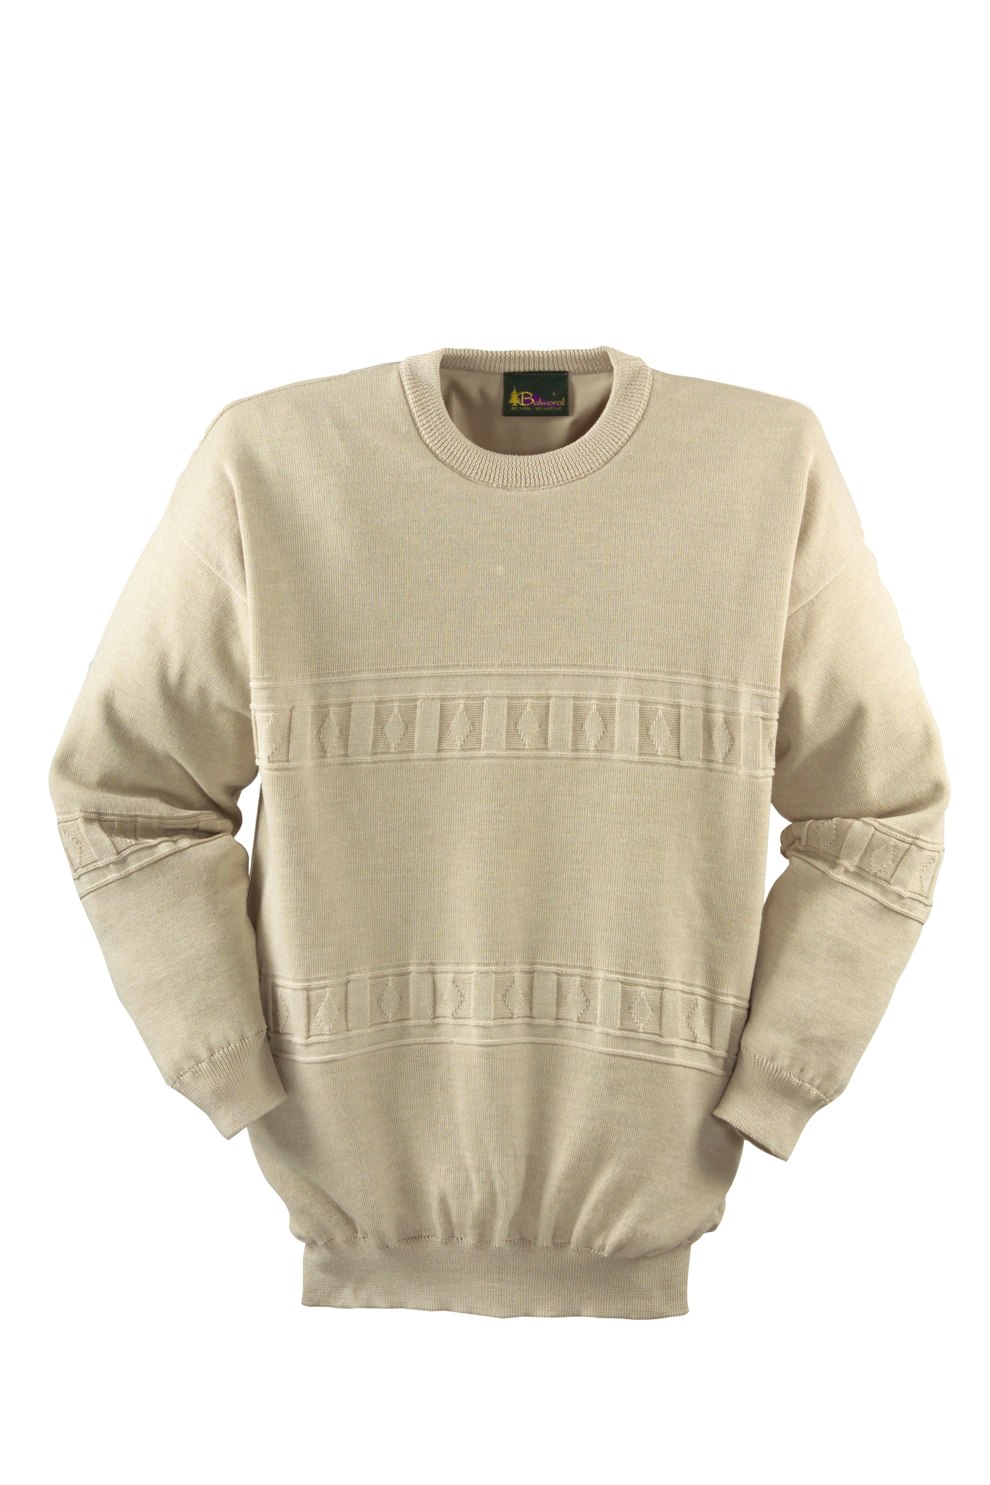 Darley: Weatherwise Crew Neck Sweater - Balmoral Mill Shop